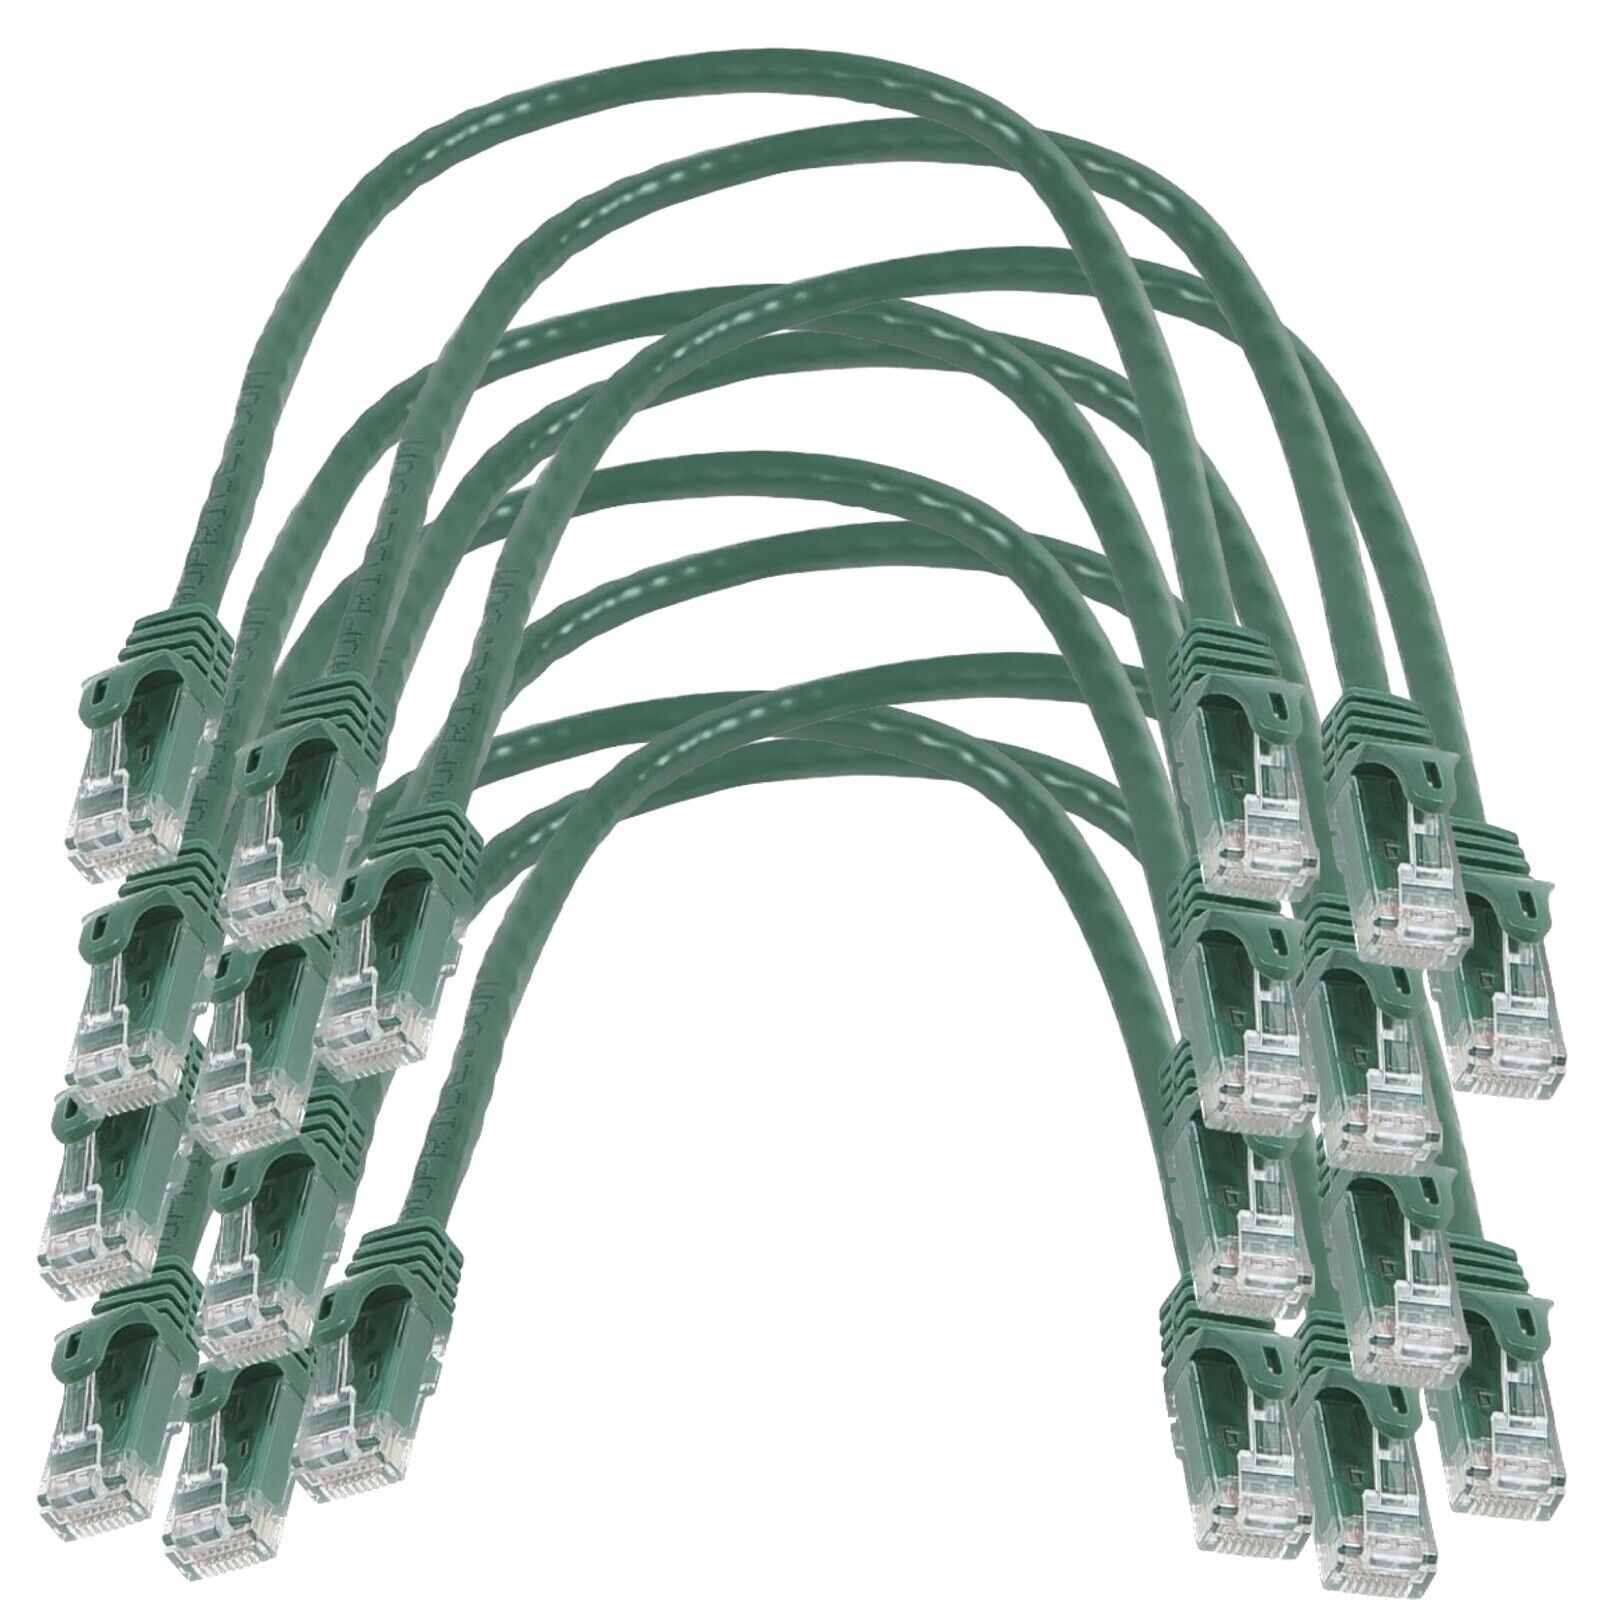 QTY 10 GREEN Monoprice Flexboot Cat5e Ethernet Cable RJ45 .5 ft 6inch NEW